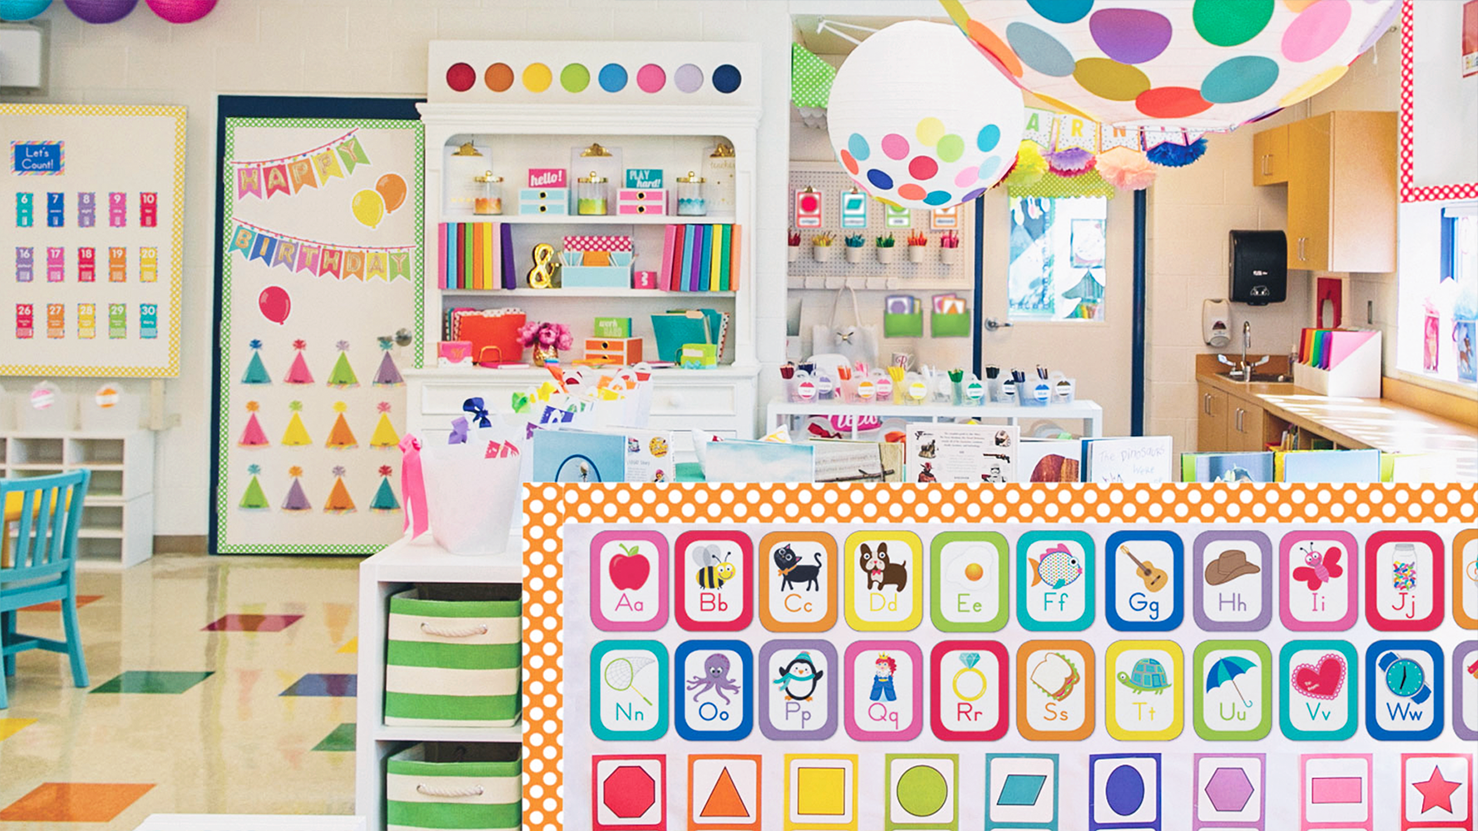 Classroom filled with the colorful and cheerful Just Teach Décor Theme